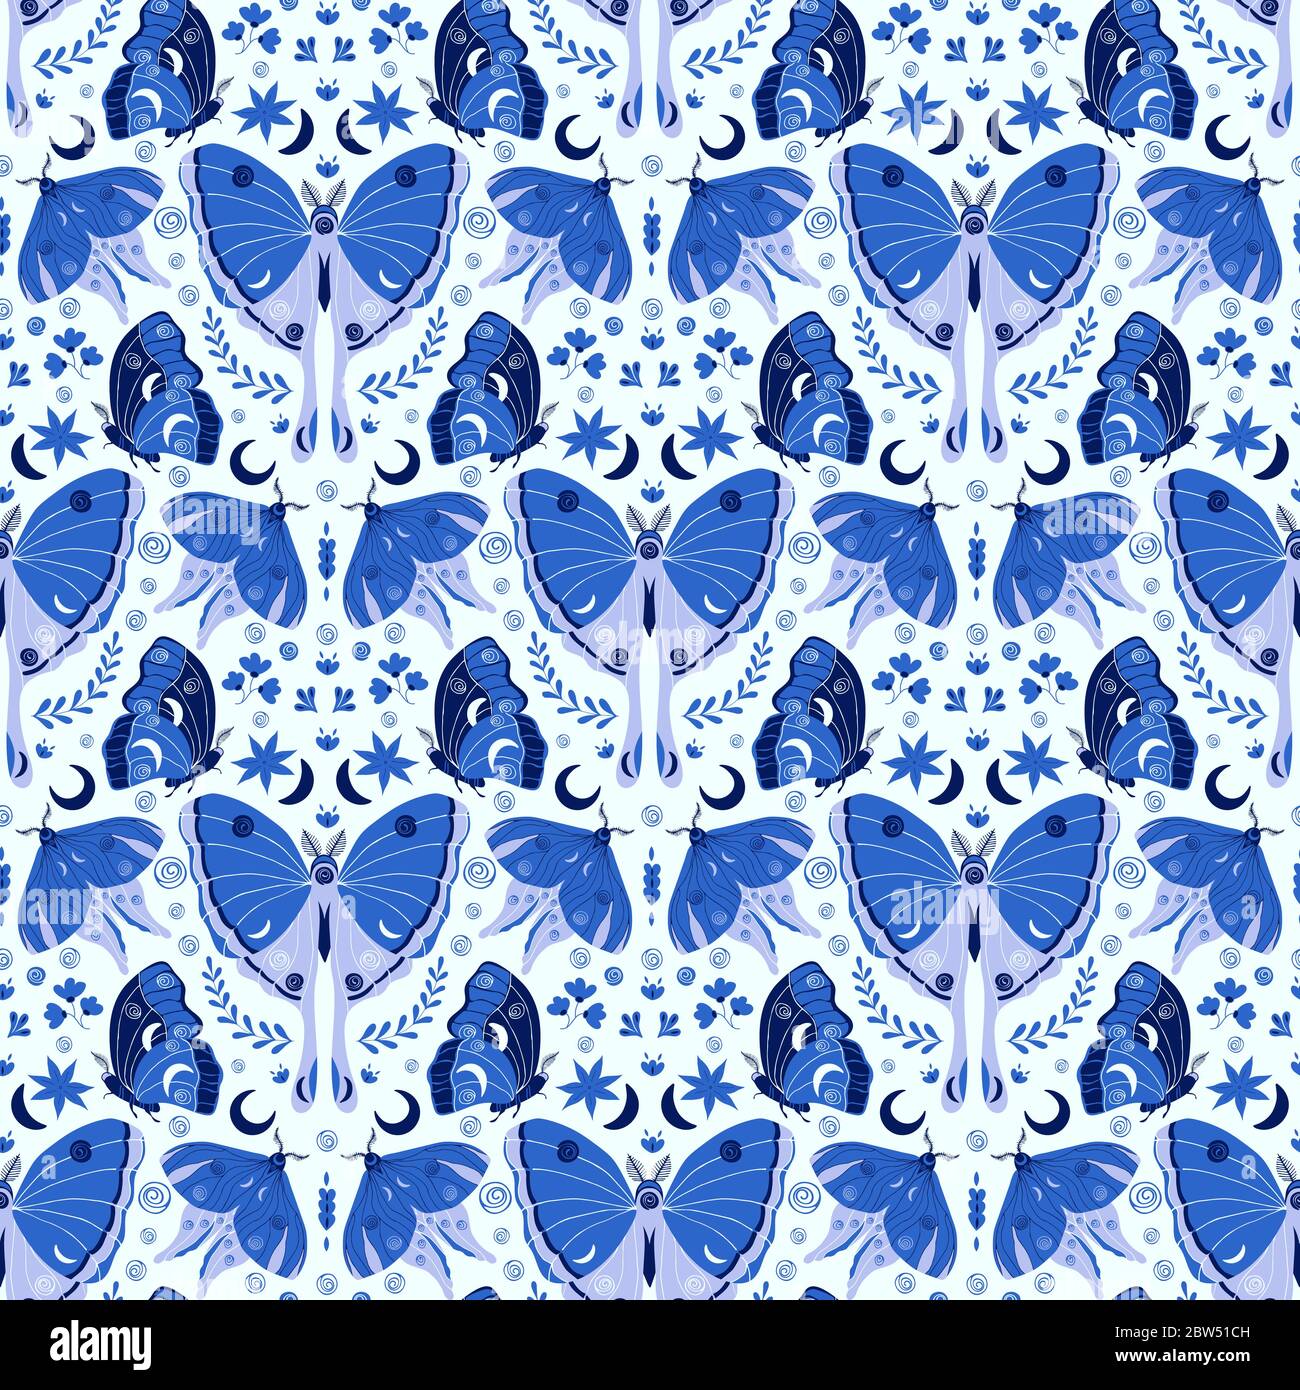 Hand drawn moths/butterflies pattern in a scallop reflected repeat colored in tones of blues. Elegant seamless vintage style vector pattern. Stock Vector